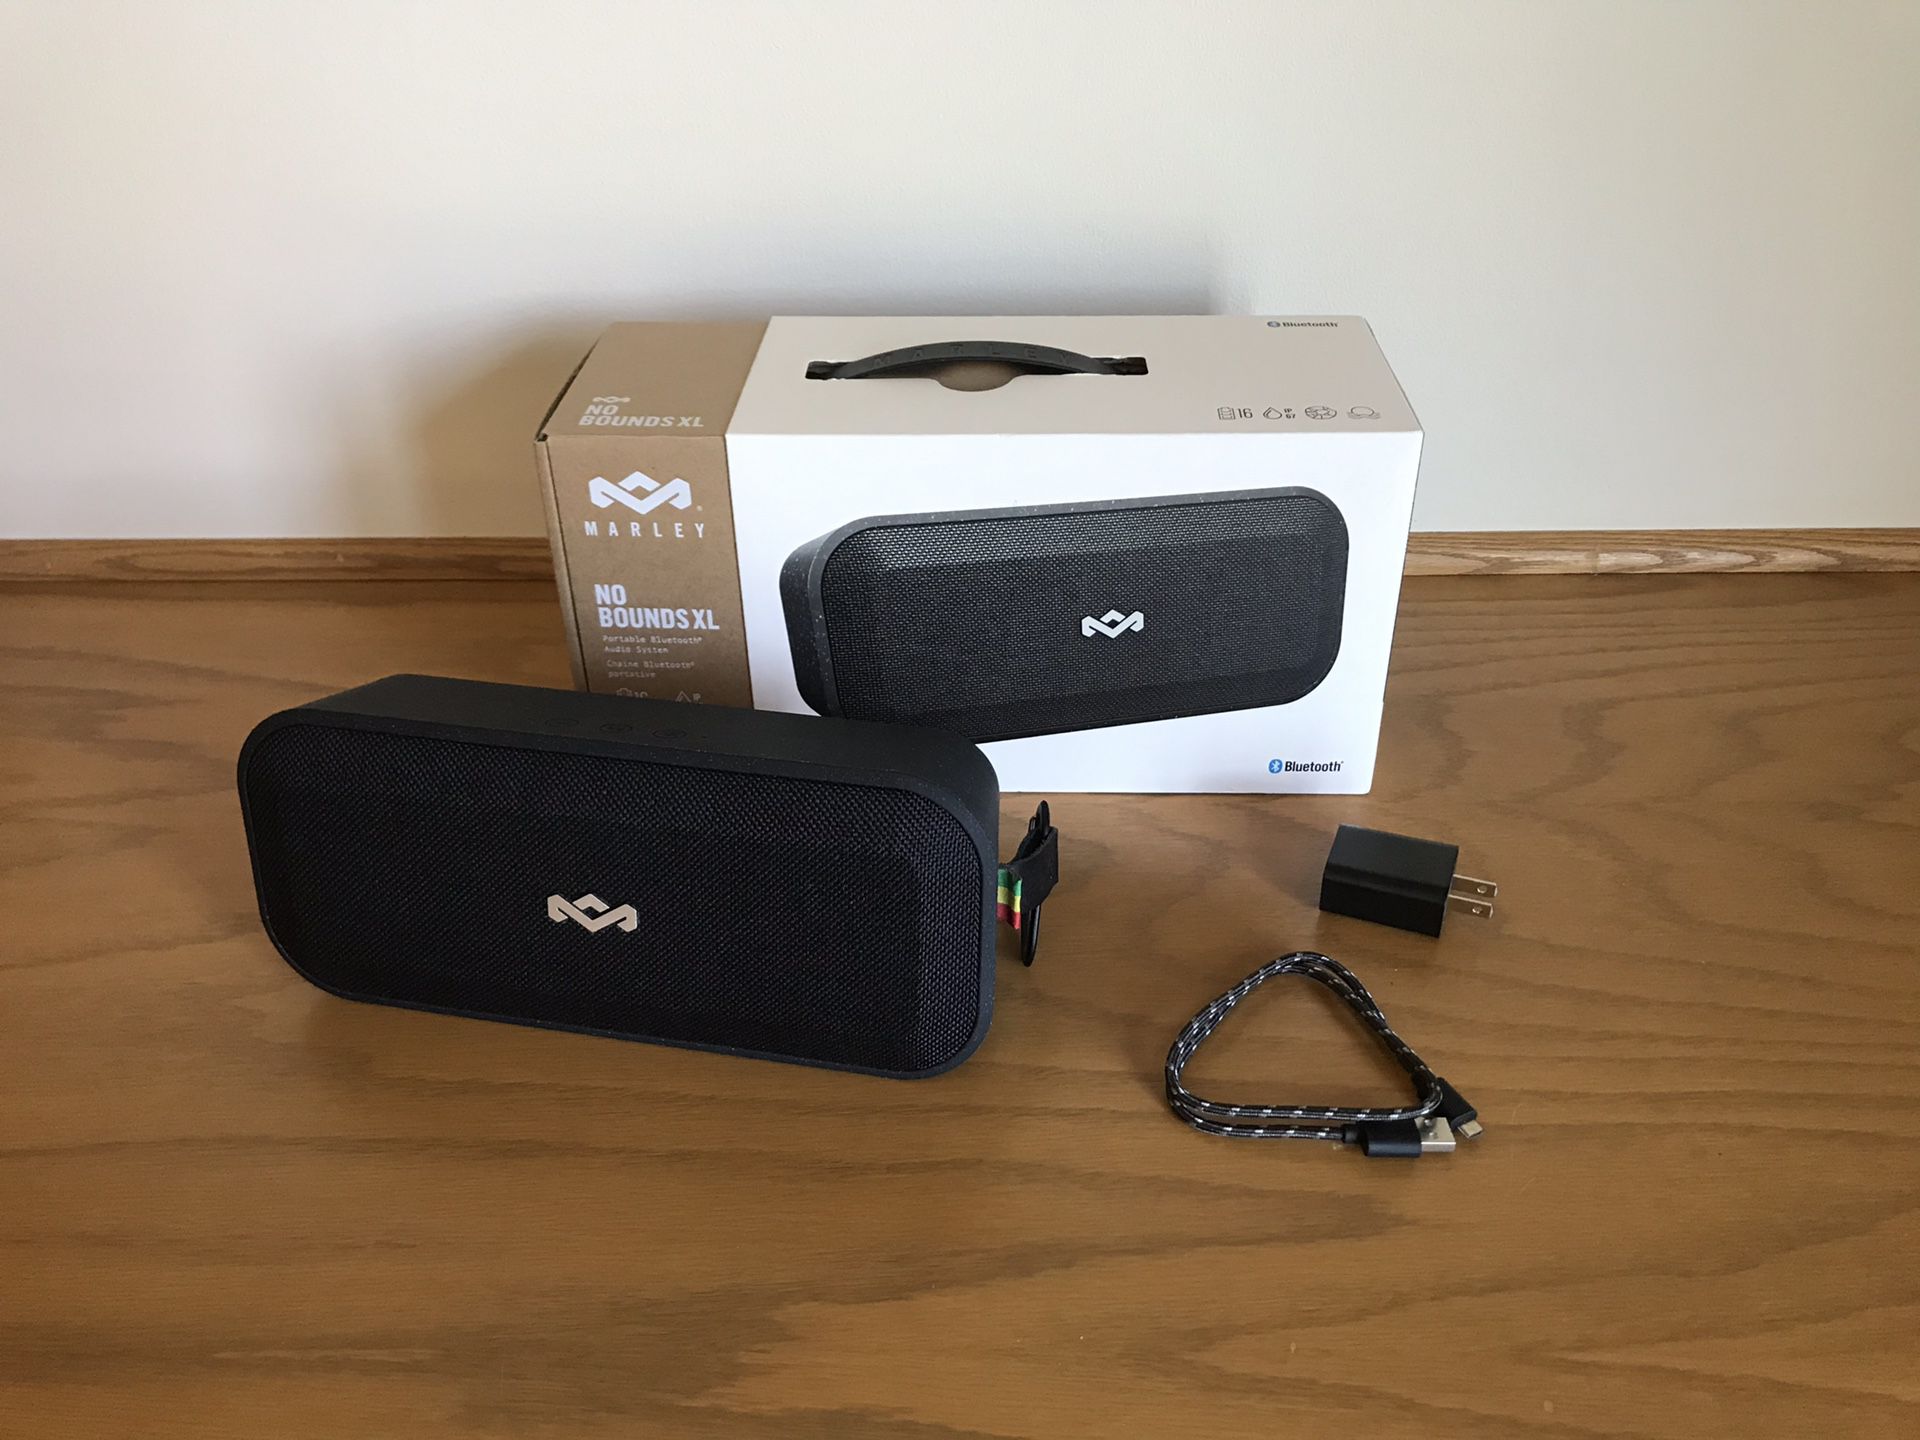 Portable Bluetooth Speaker - Marley No Bounds XL